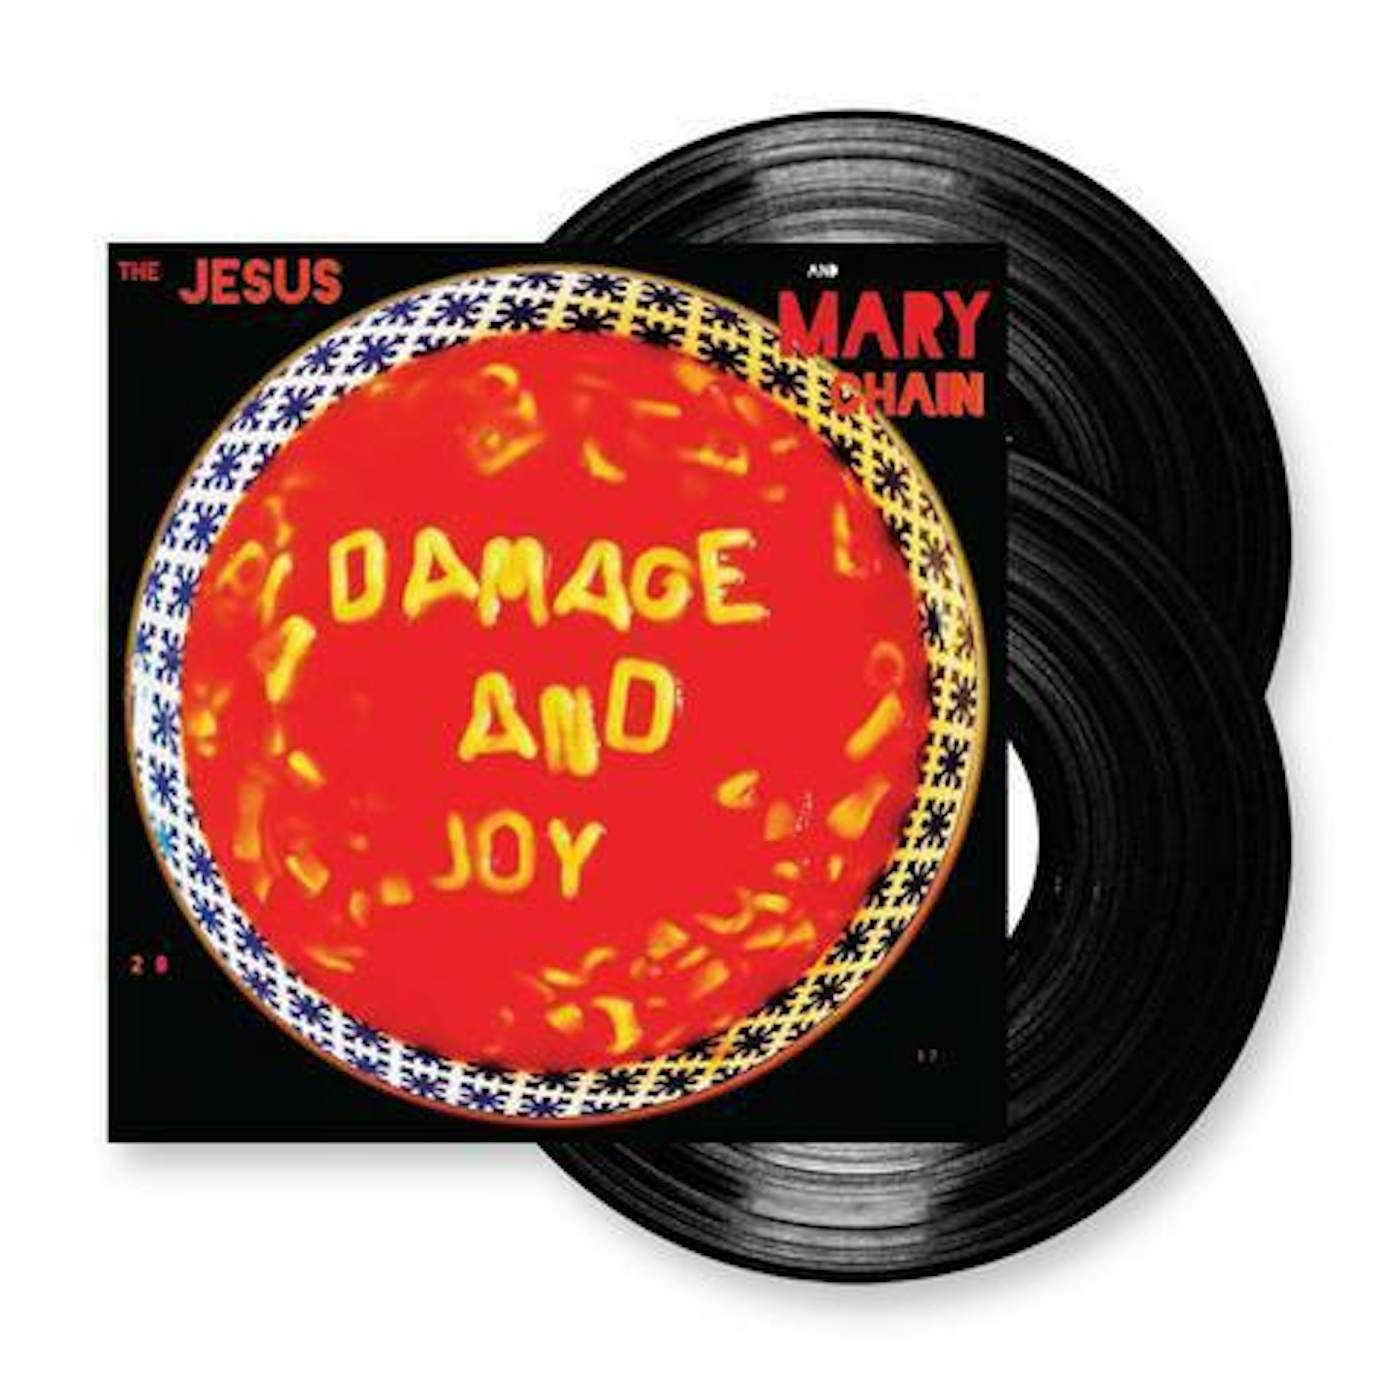 The Jesus and Mary Chain Damage & Joy (AMS Exclusive/2lp Vinyl Record)